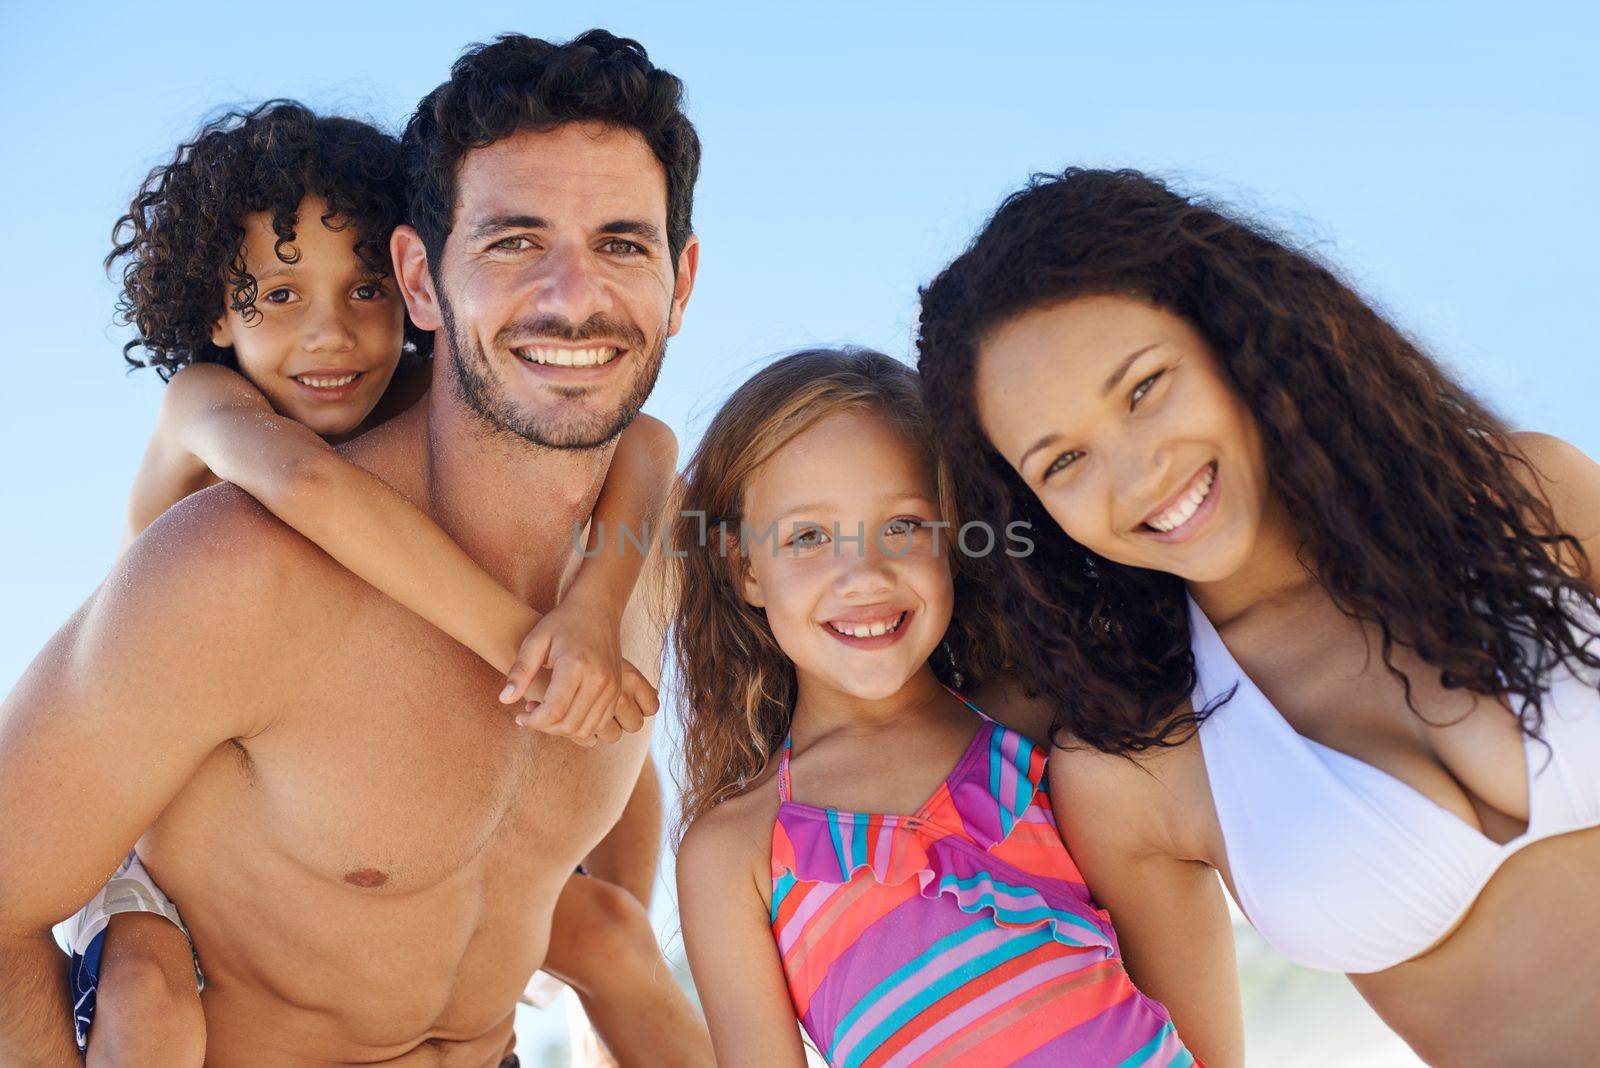 Family getaway. A family of four in swimwear smiling against a bright sky. by YuriArcurs